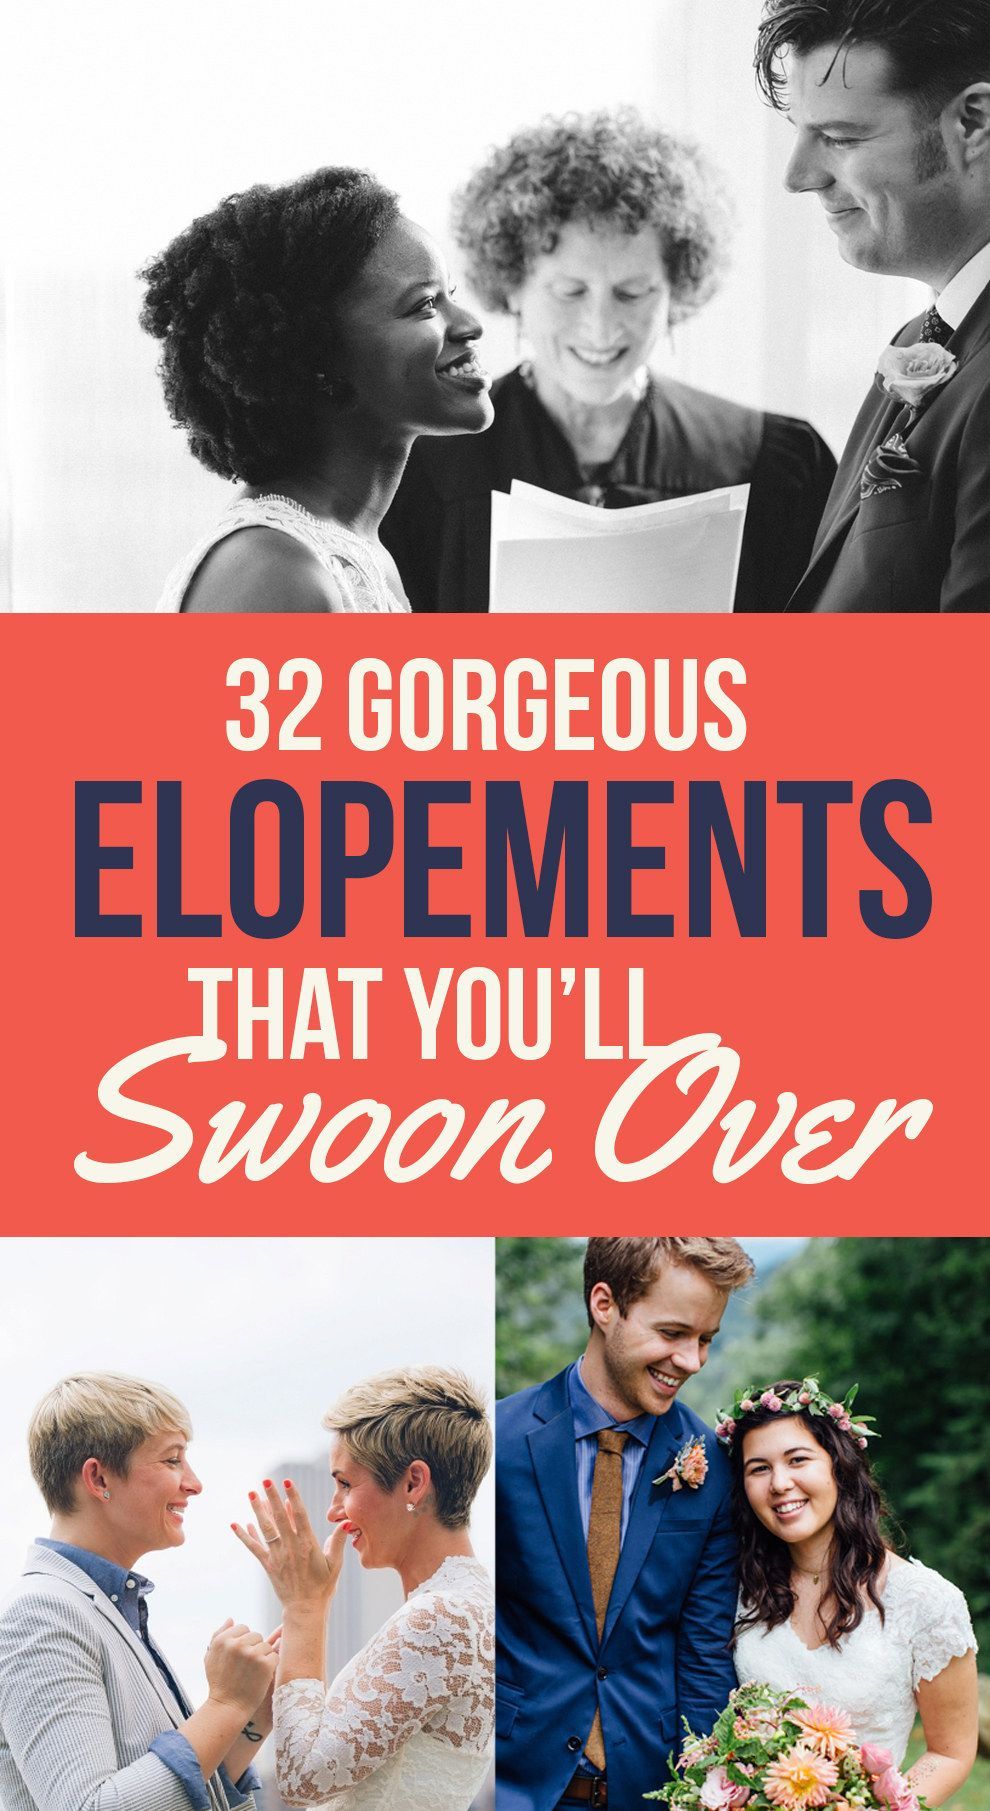 32 Incredibly Beautiful Elopements You Have To See -   11 wedding Small buzzfeed ideas